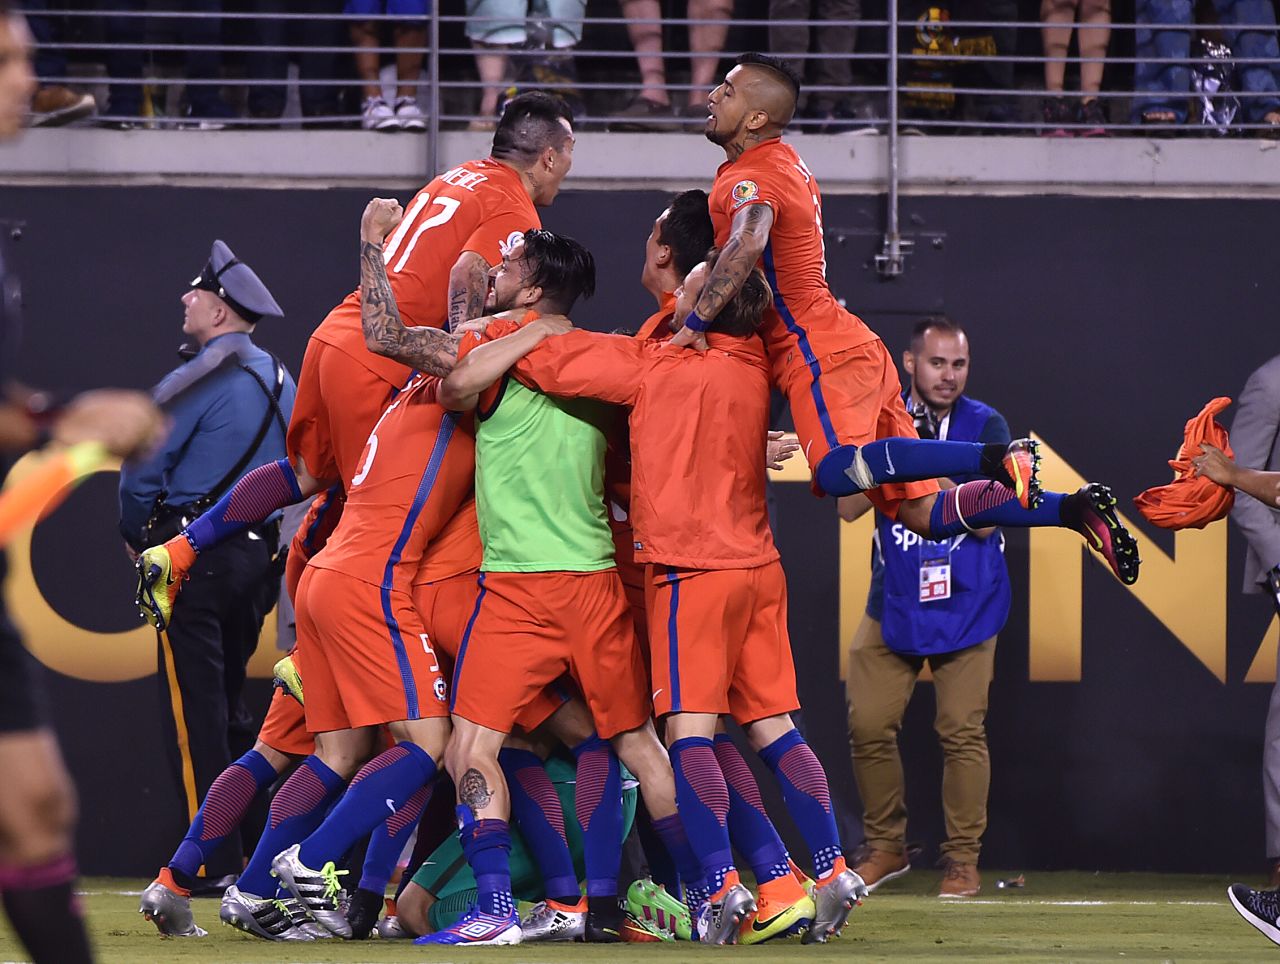 Chile's players celebrate after defeating Argentina in the penalty shoot-out and winning the Copa America Centenario final in East Rutherford, New Jersey, on Sunday, June 26.  